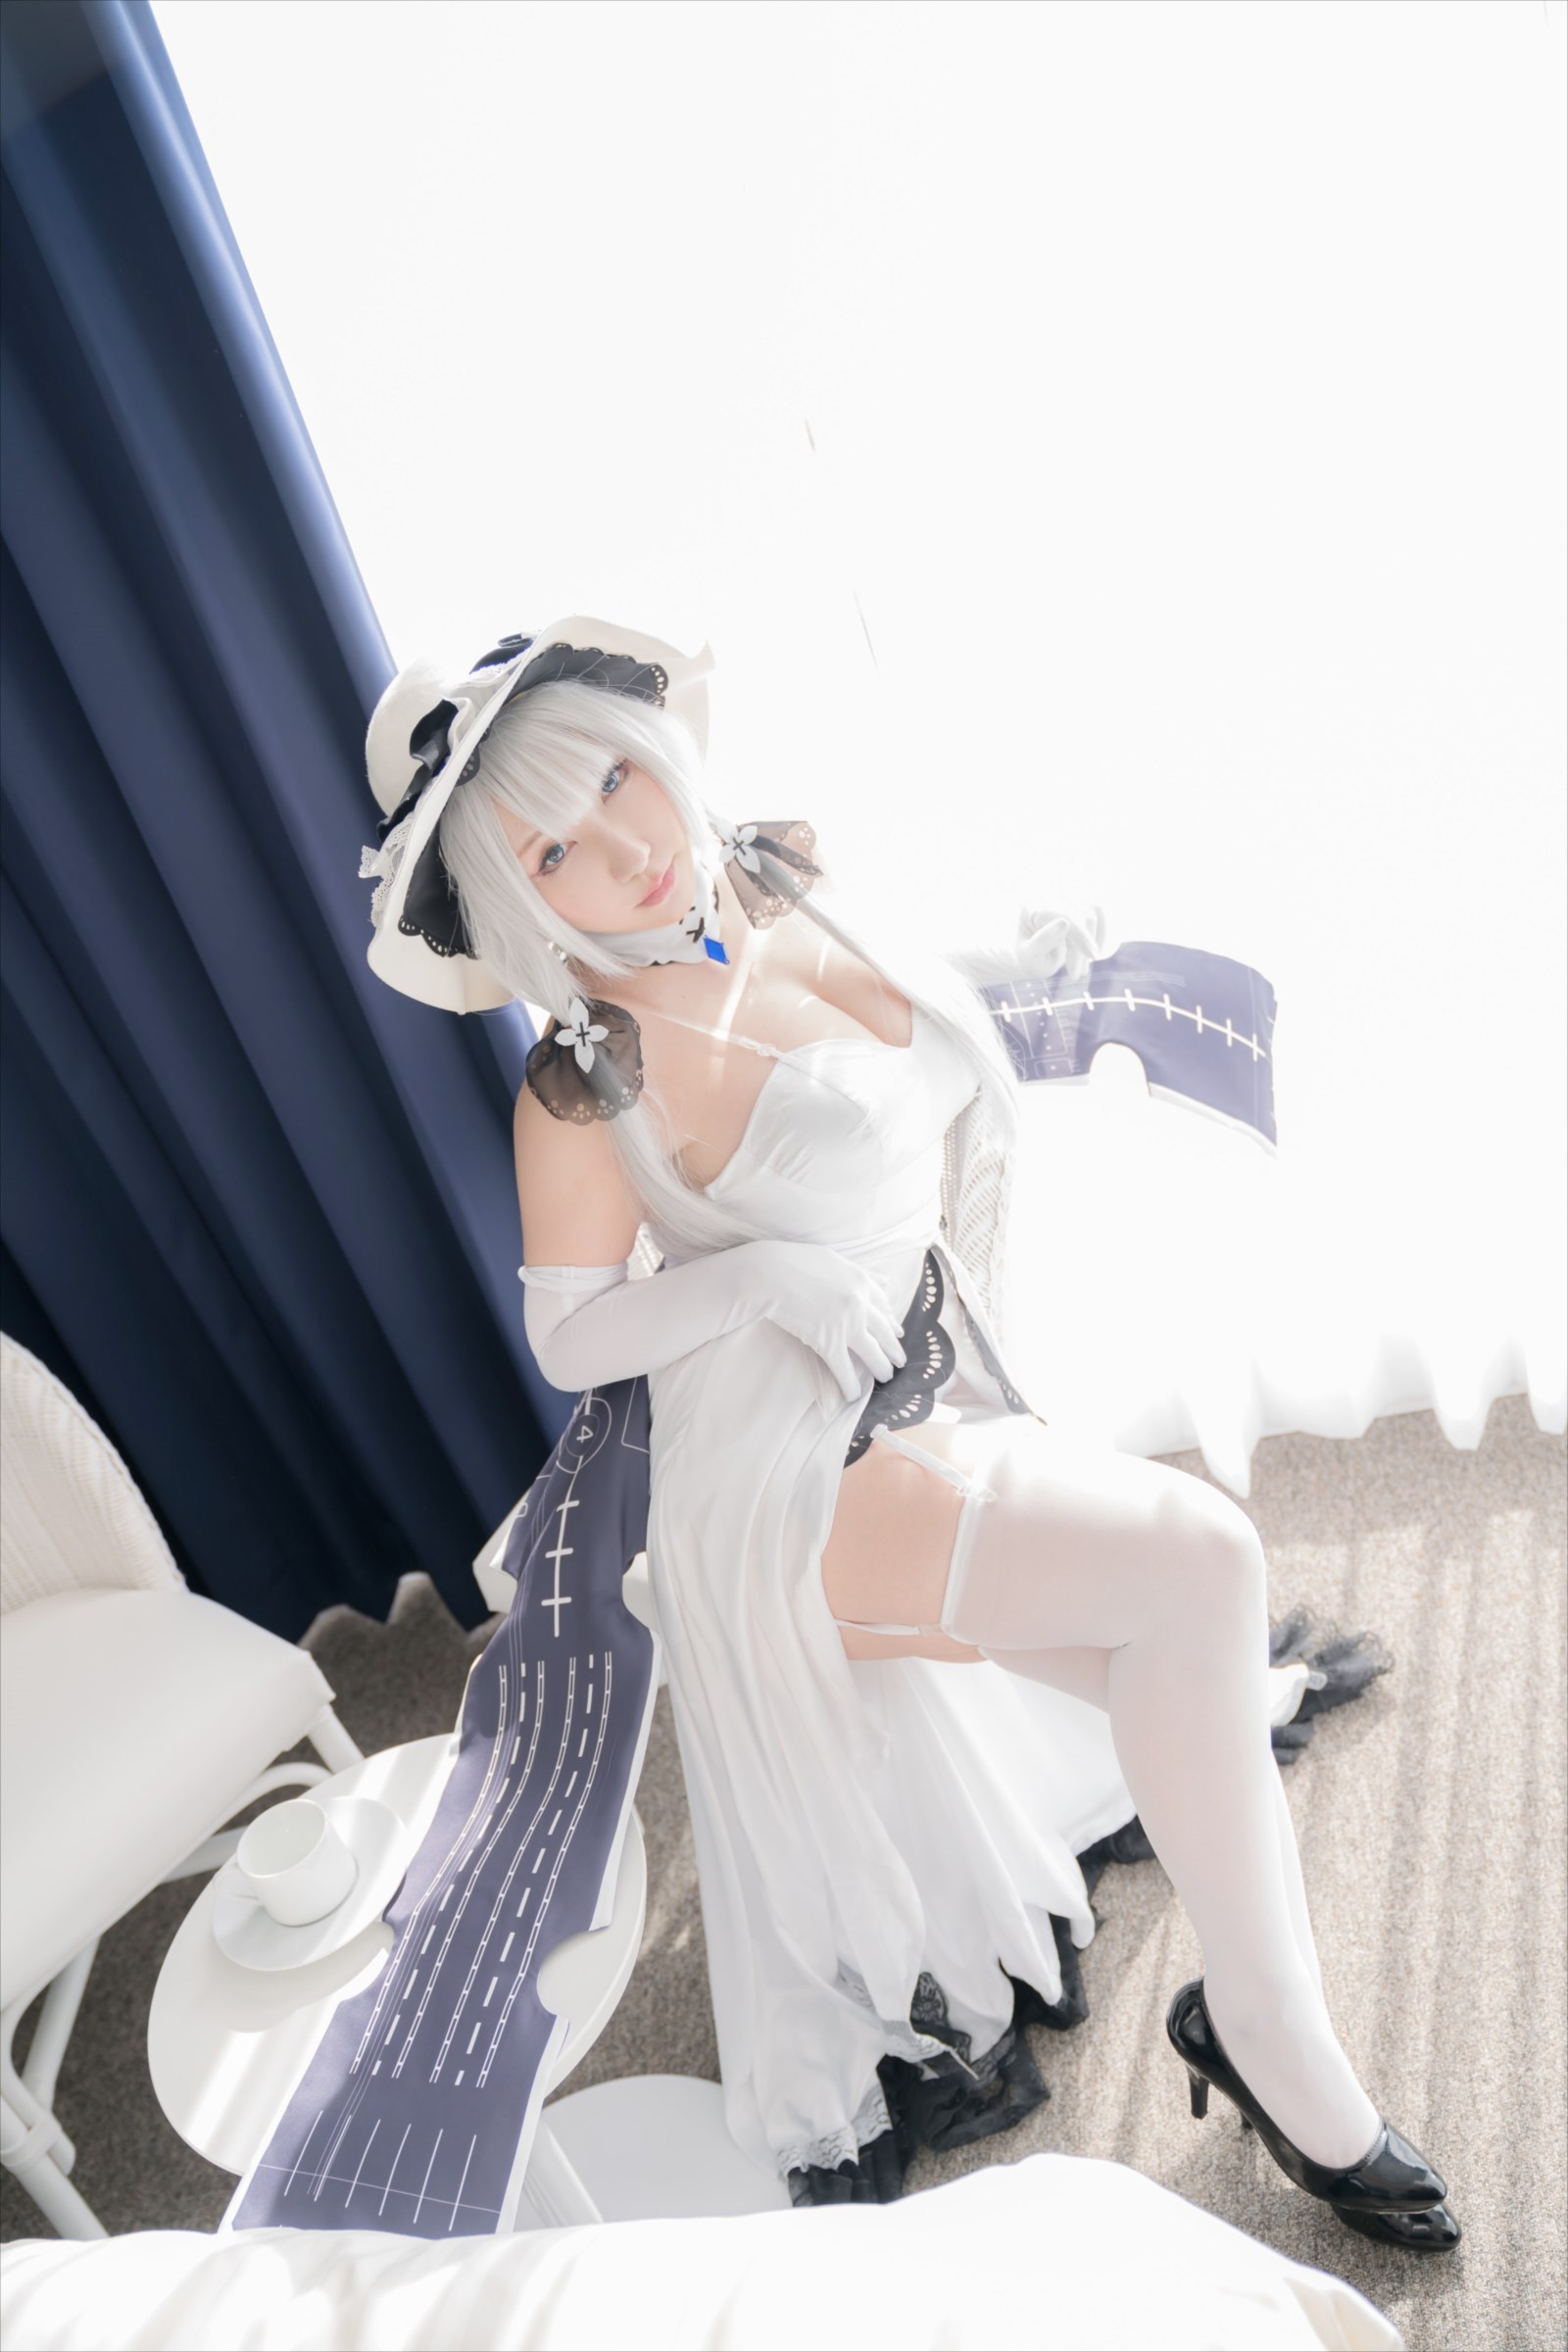 (Cosplay) (C94) Shooting Star (サク) Melty White 221P85MB1(19)